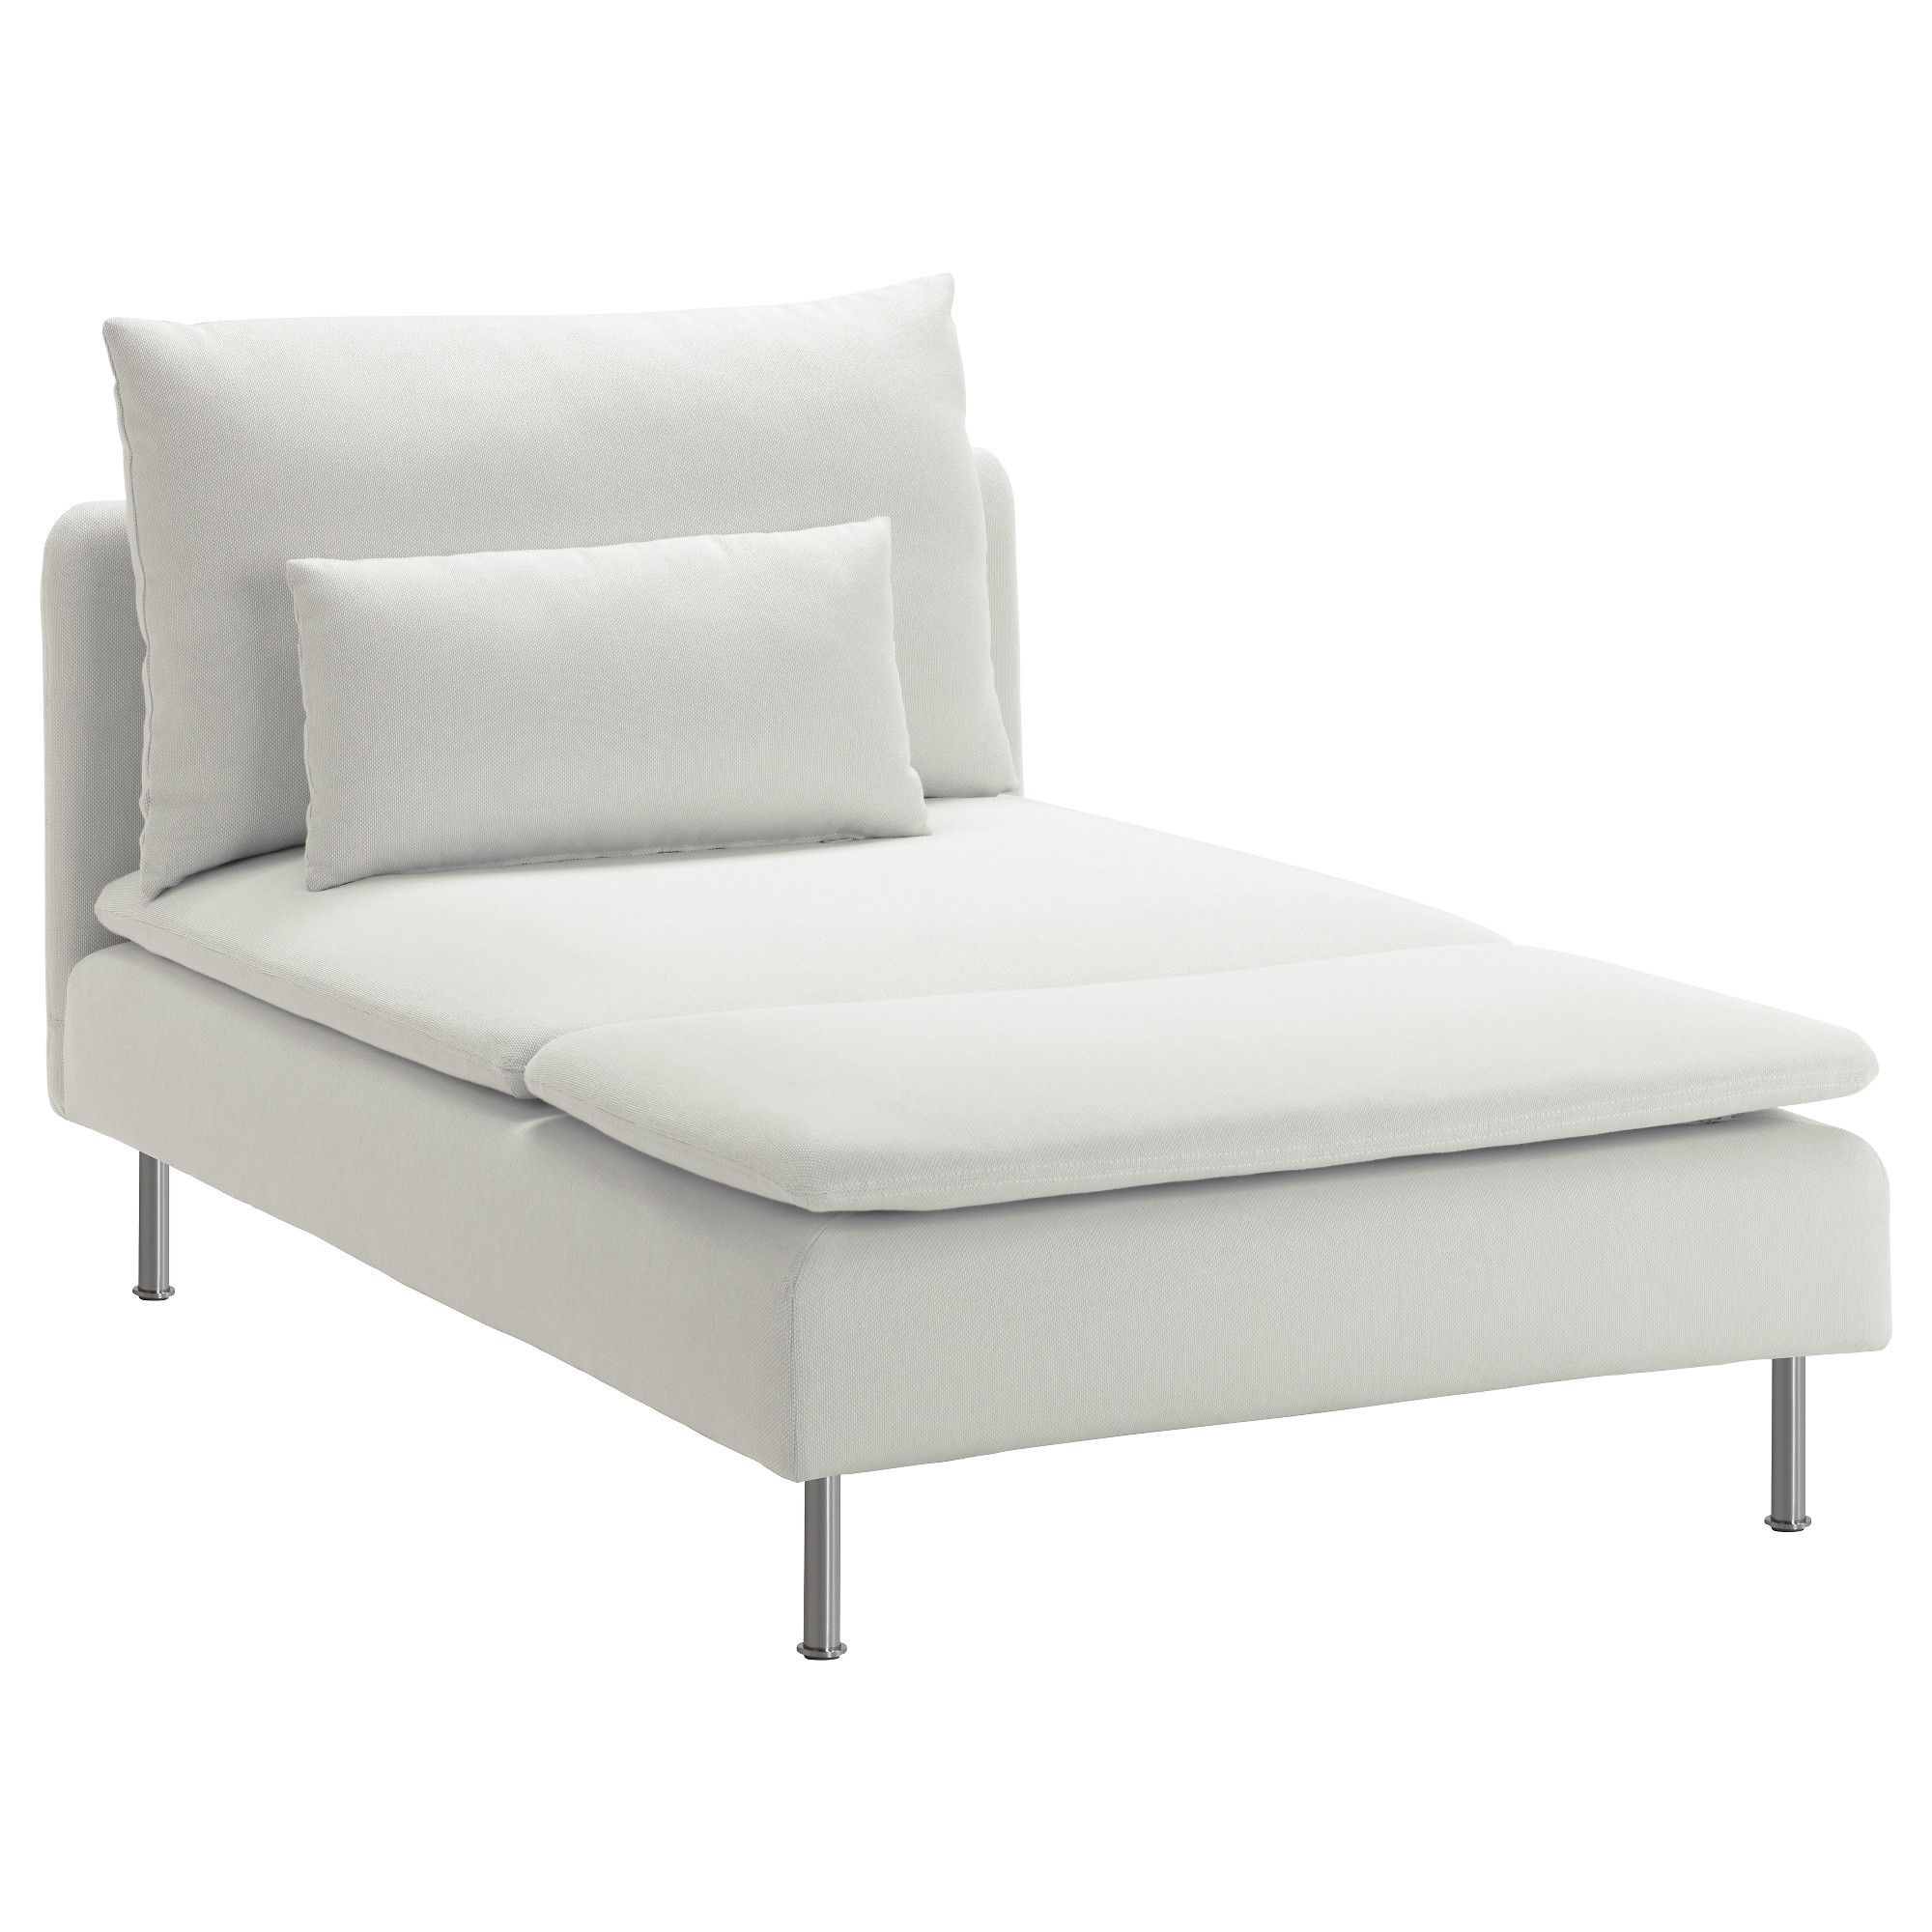 Widely Used Chaise Lounge Beds Regarding Söderhamn Chaise – Samsta Dark Gray – Ikea (View 1 of 15)